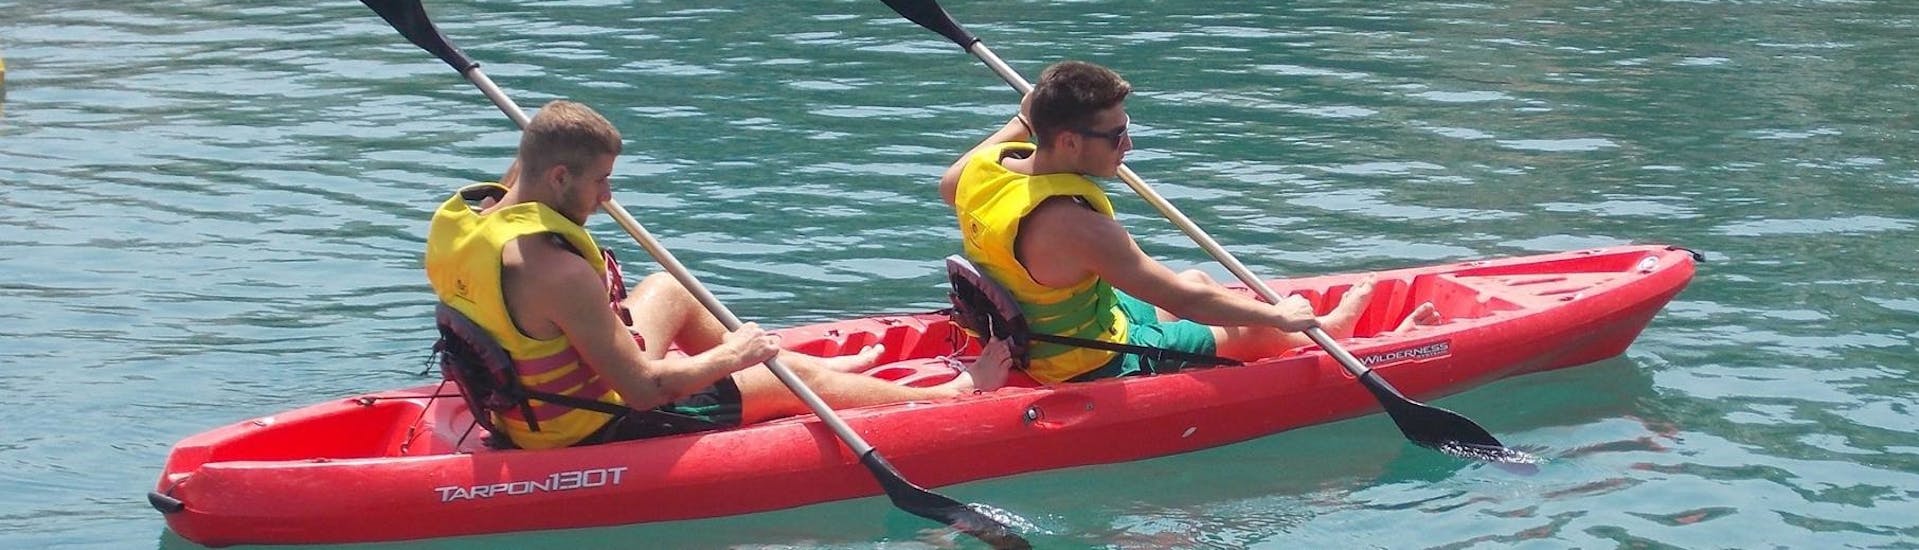 Two people are paddling together on the canoe during the Canoe Hire at Bali on Crete with The Skippers Bali.